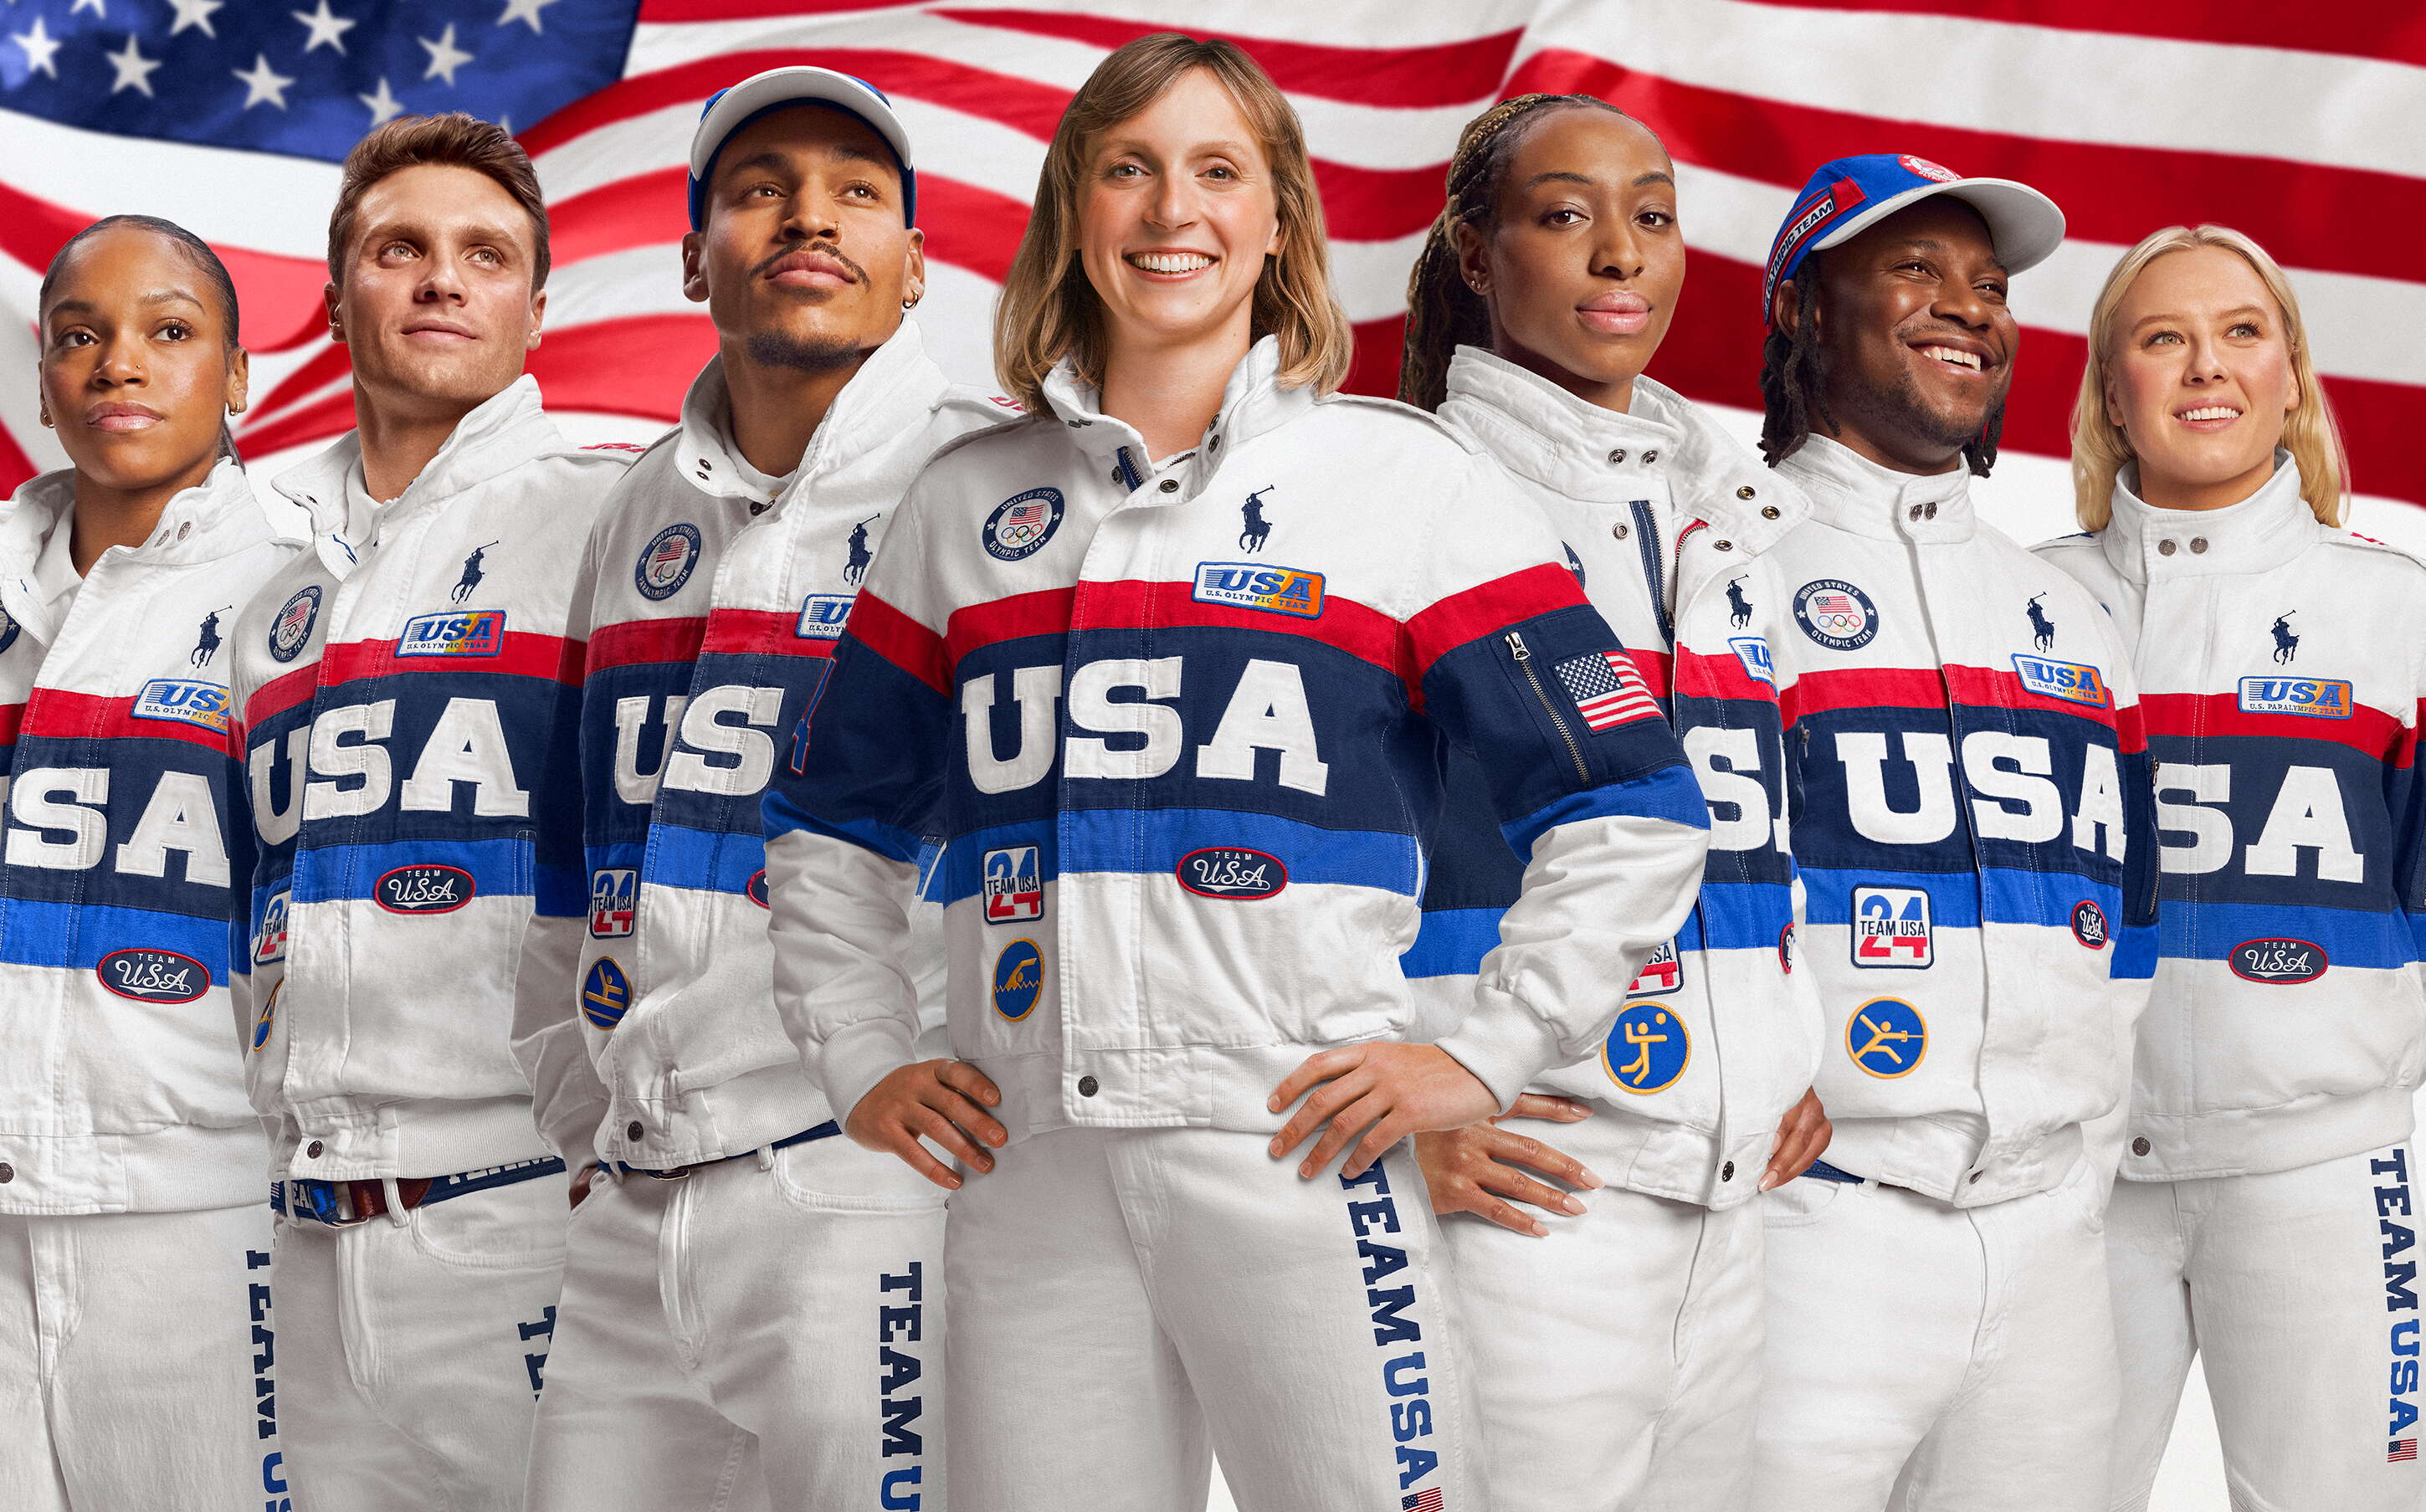 White outfits with USA written on the front.